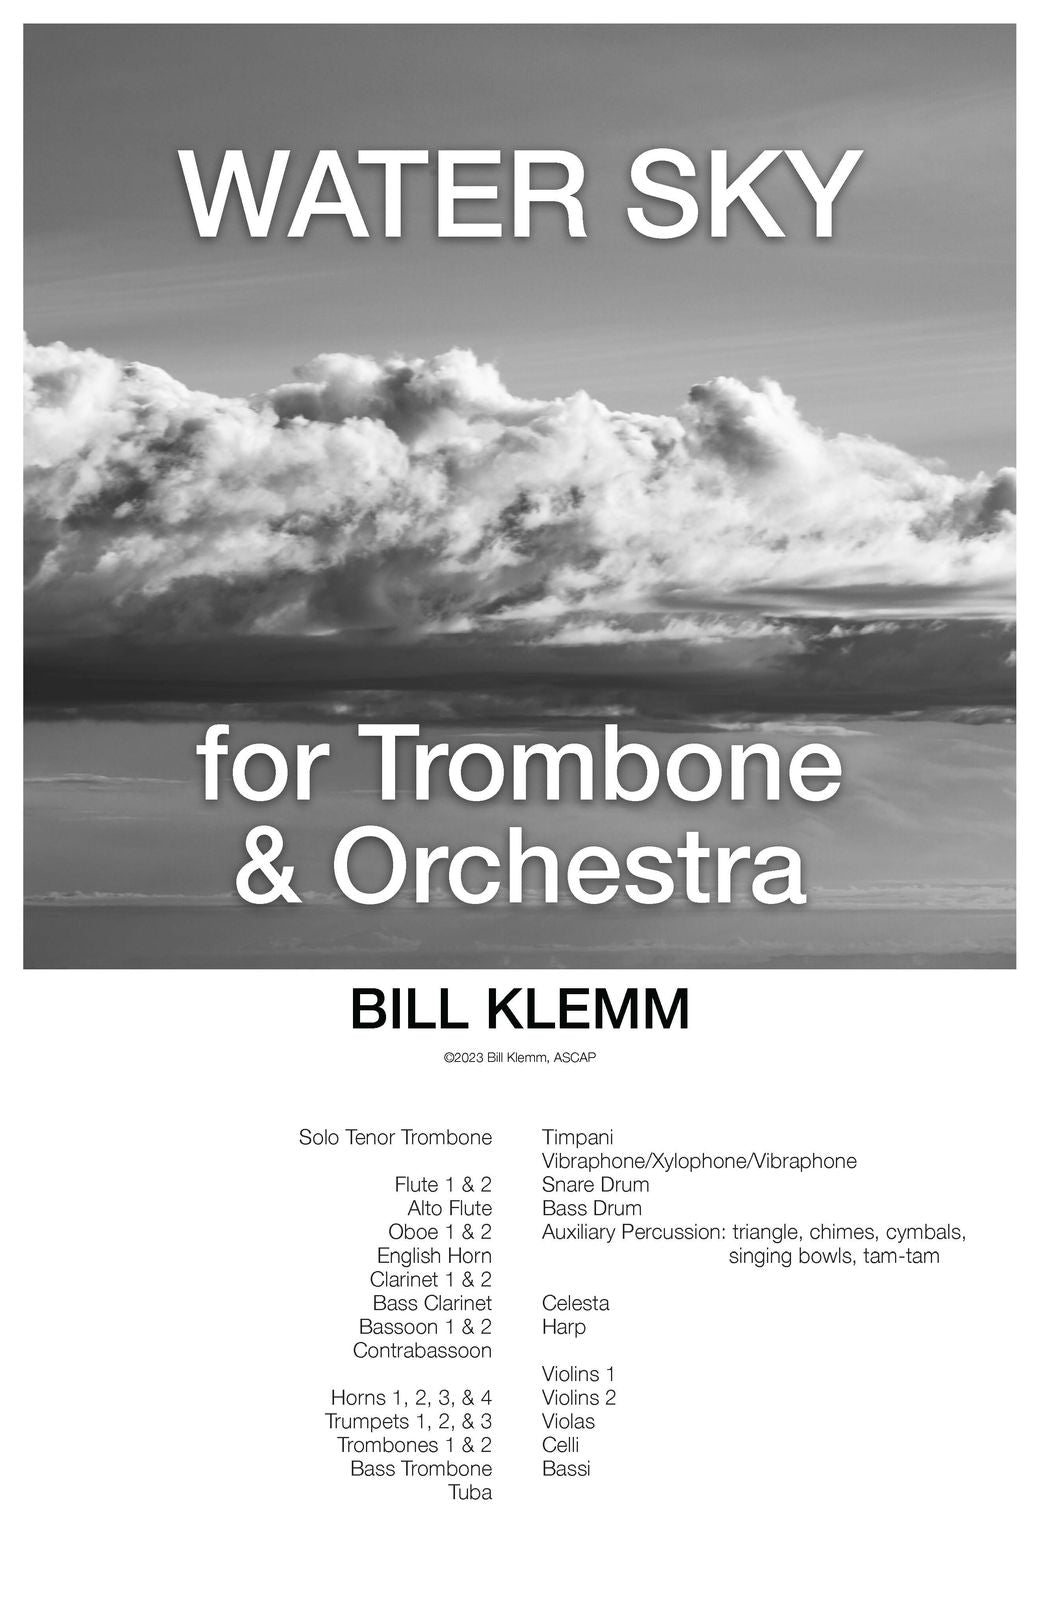 Bill Klemm: Water Sky for Trombone and Orchestra